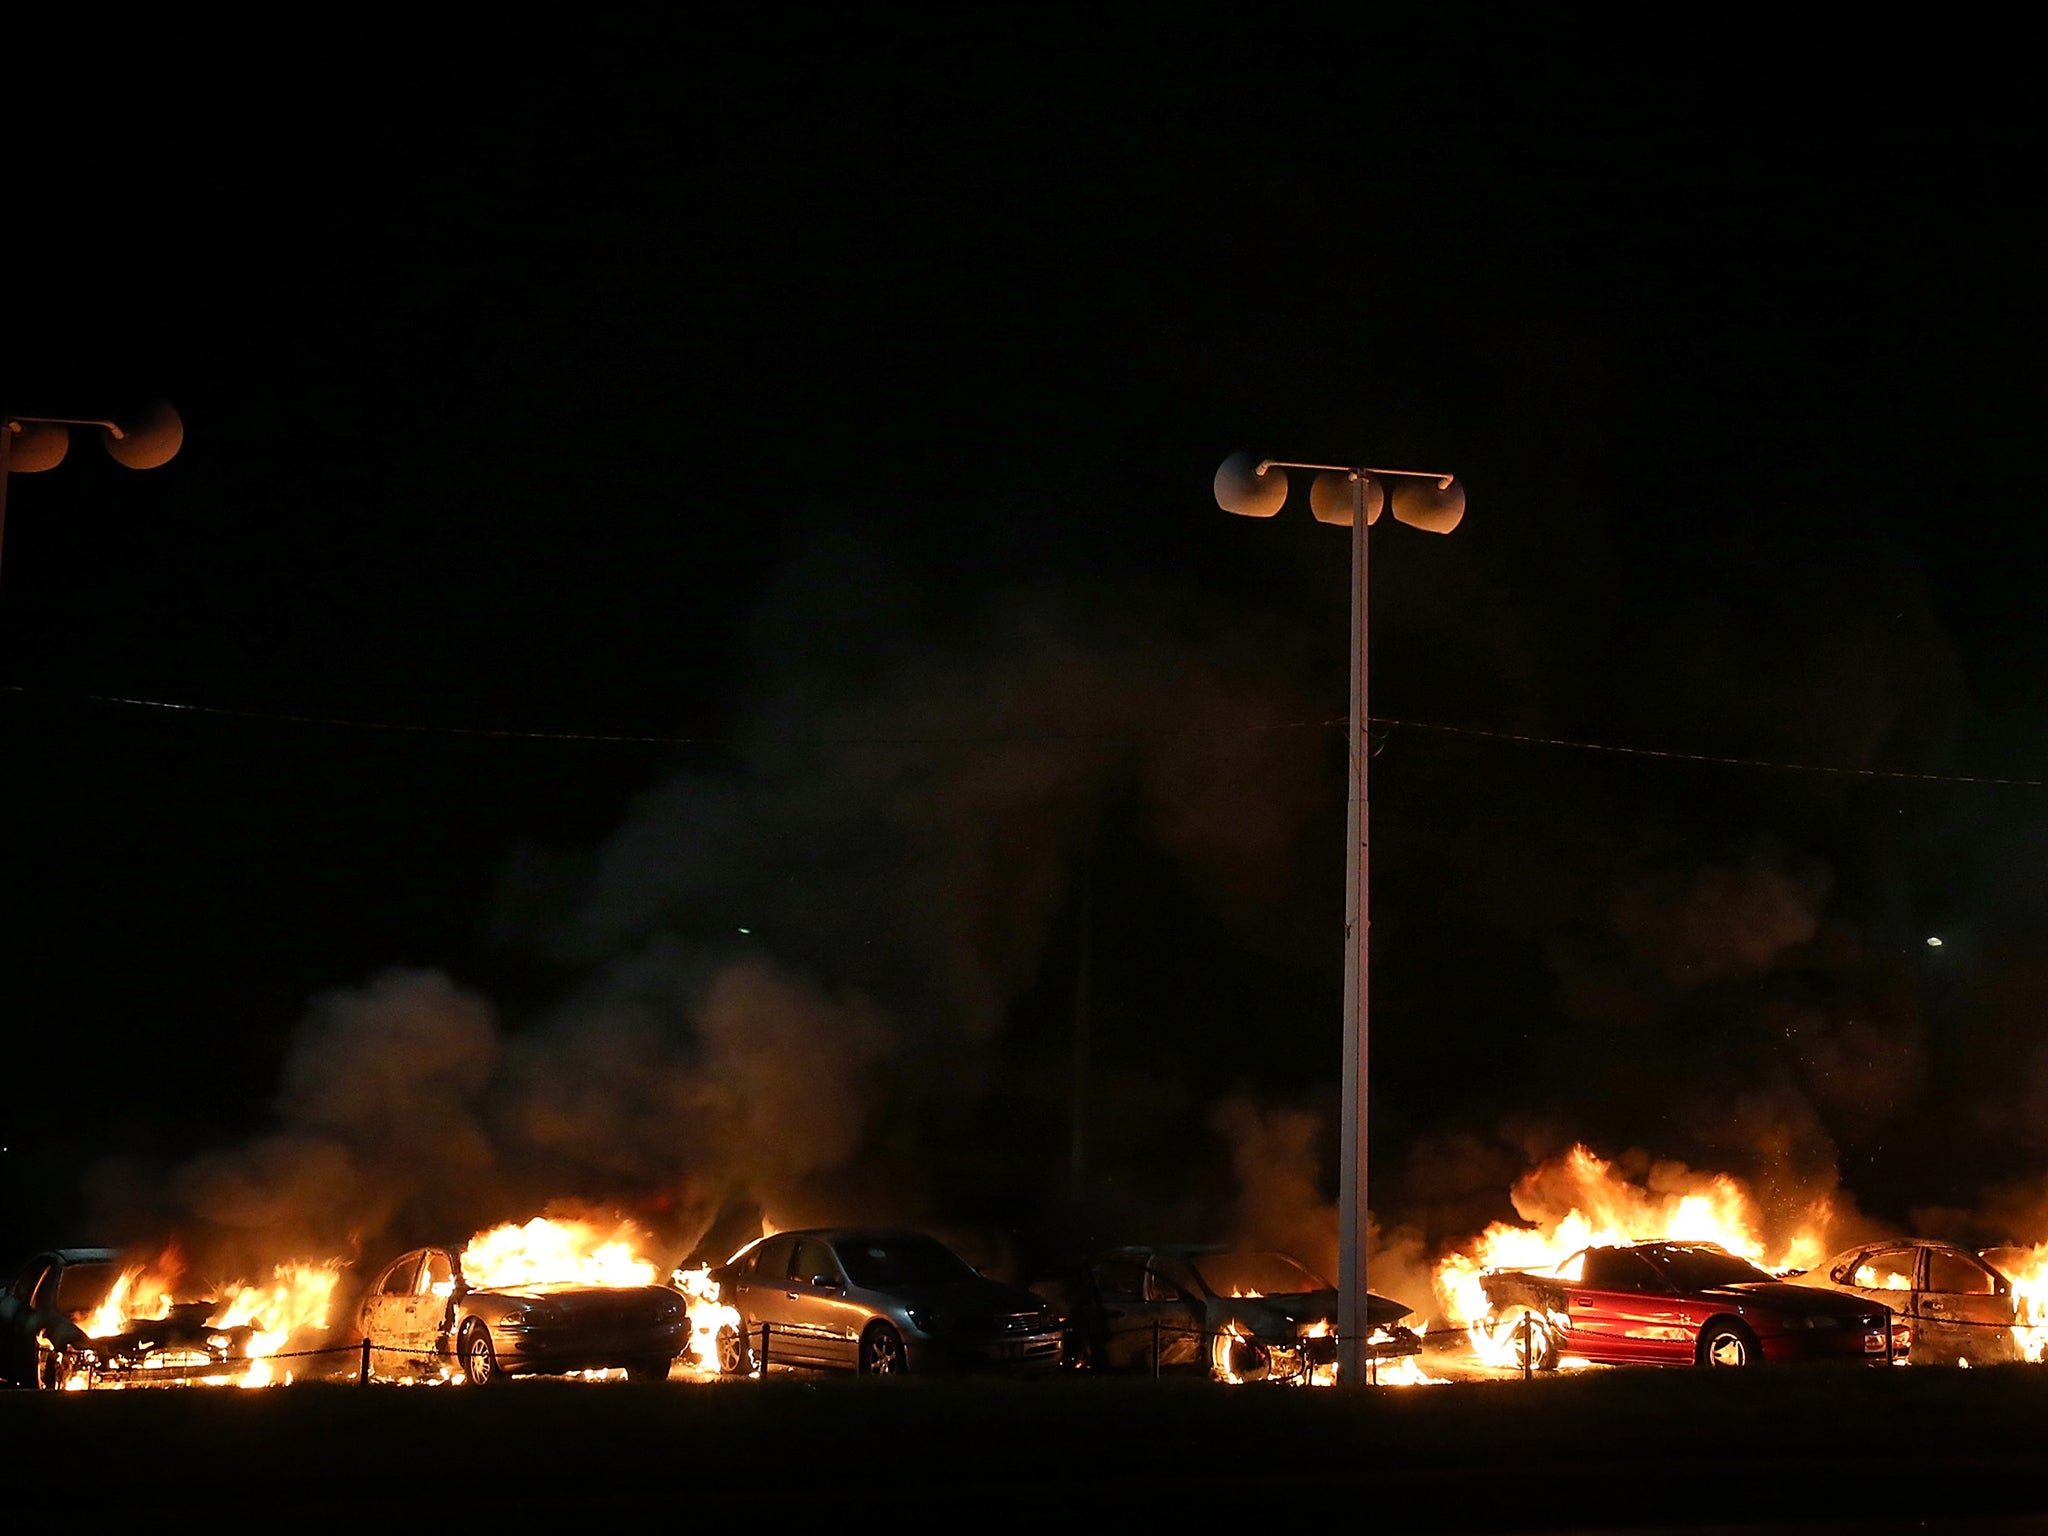 A row of cars burn at a used car lot during a demonstration on November 25, 2014 in Ferguson, Missouri.